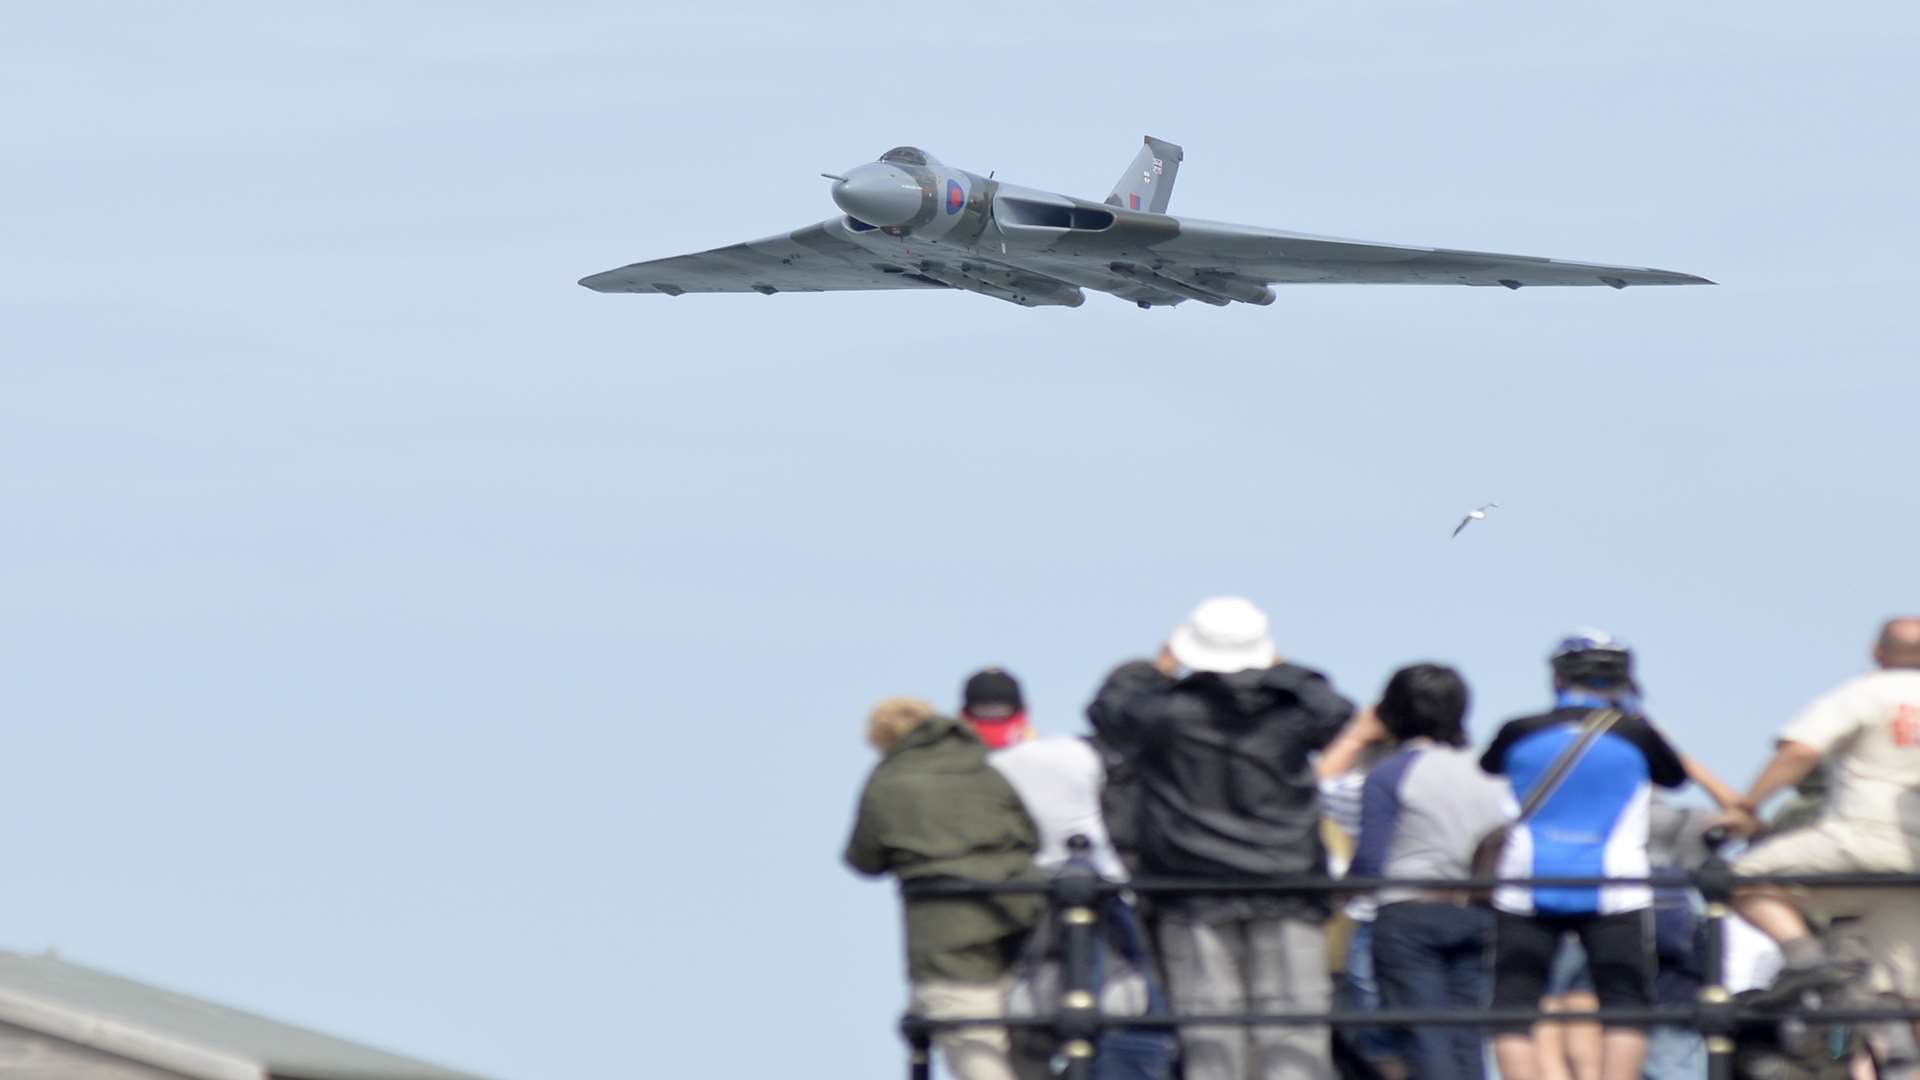 The Vulcan bomber at the recent Herne Bay airshow